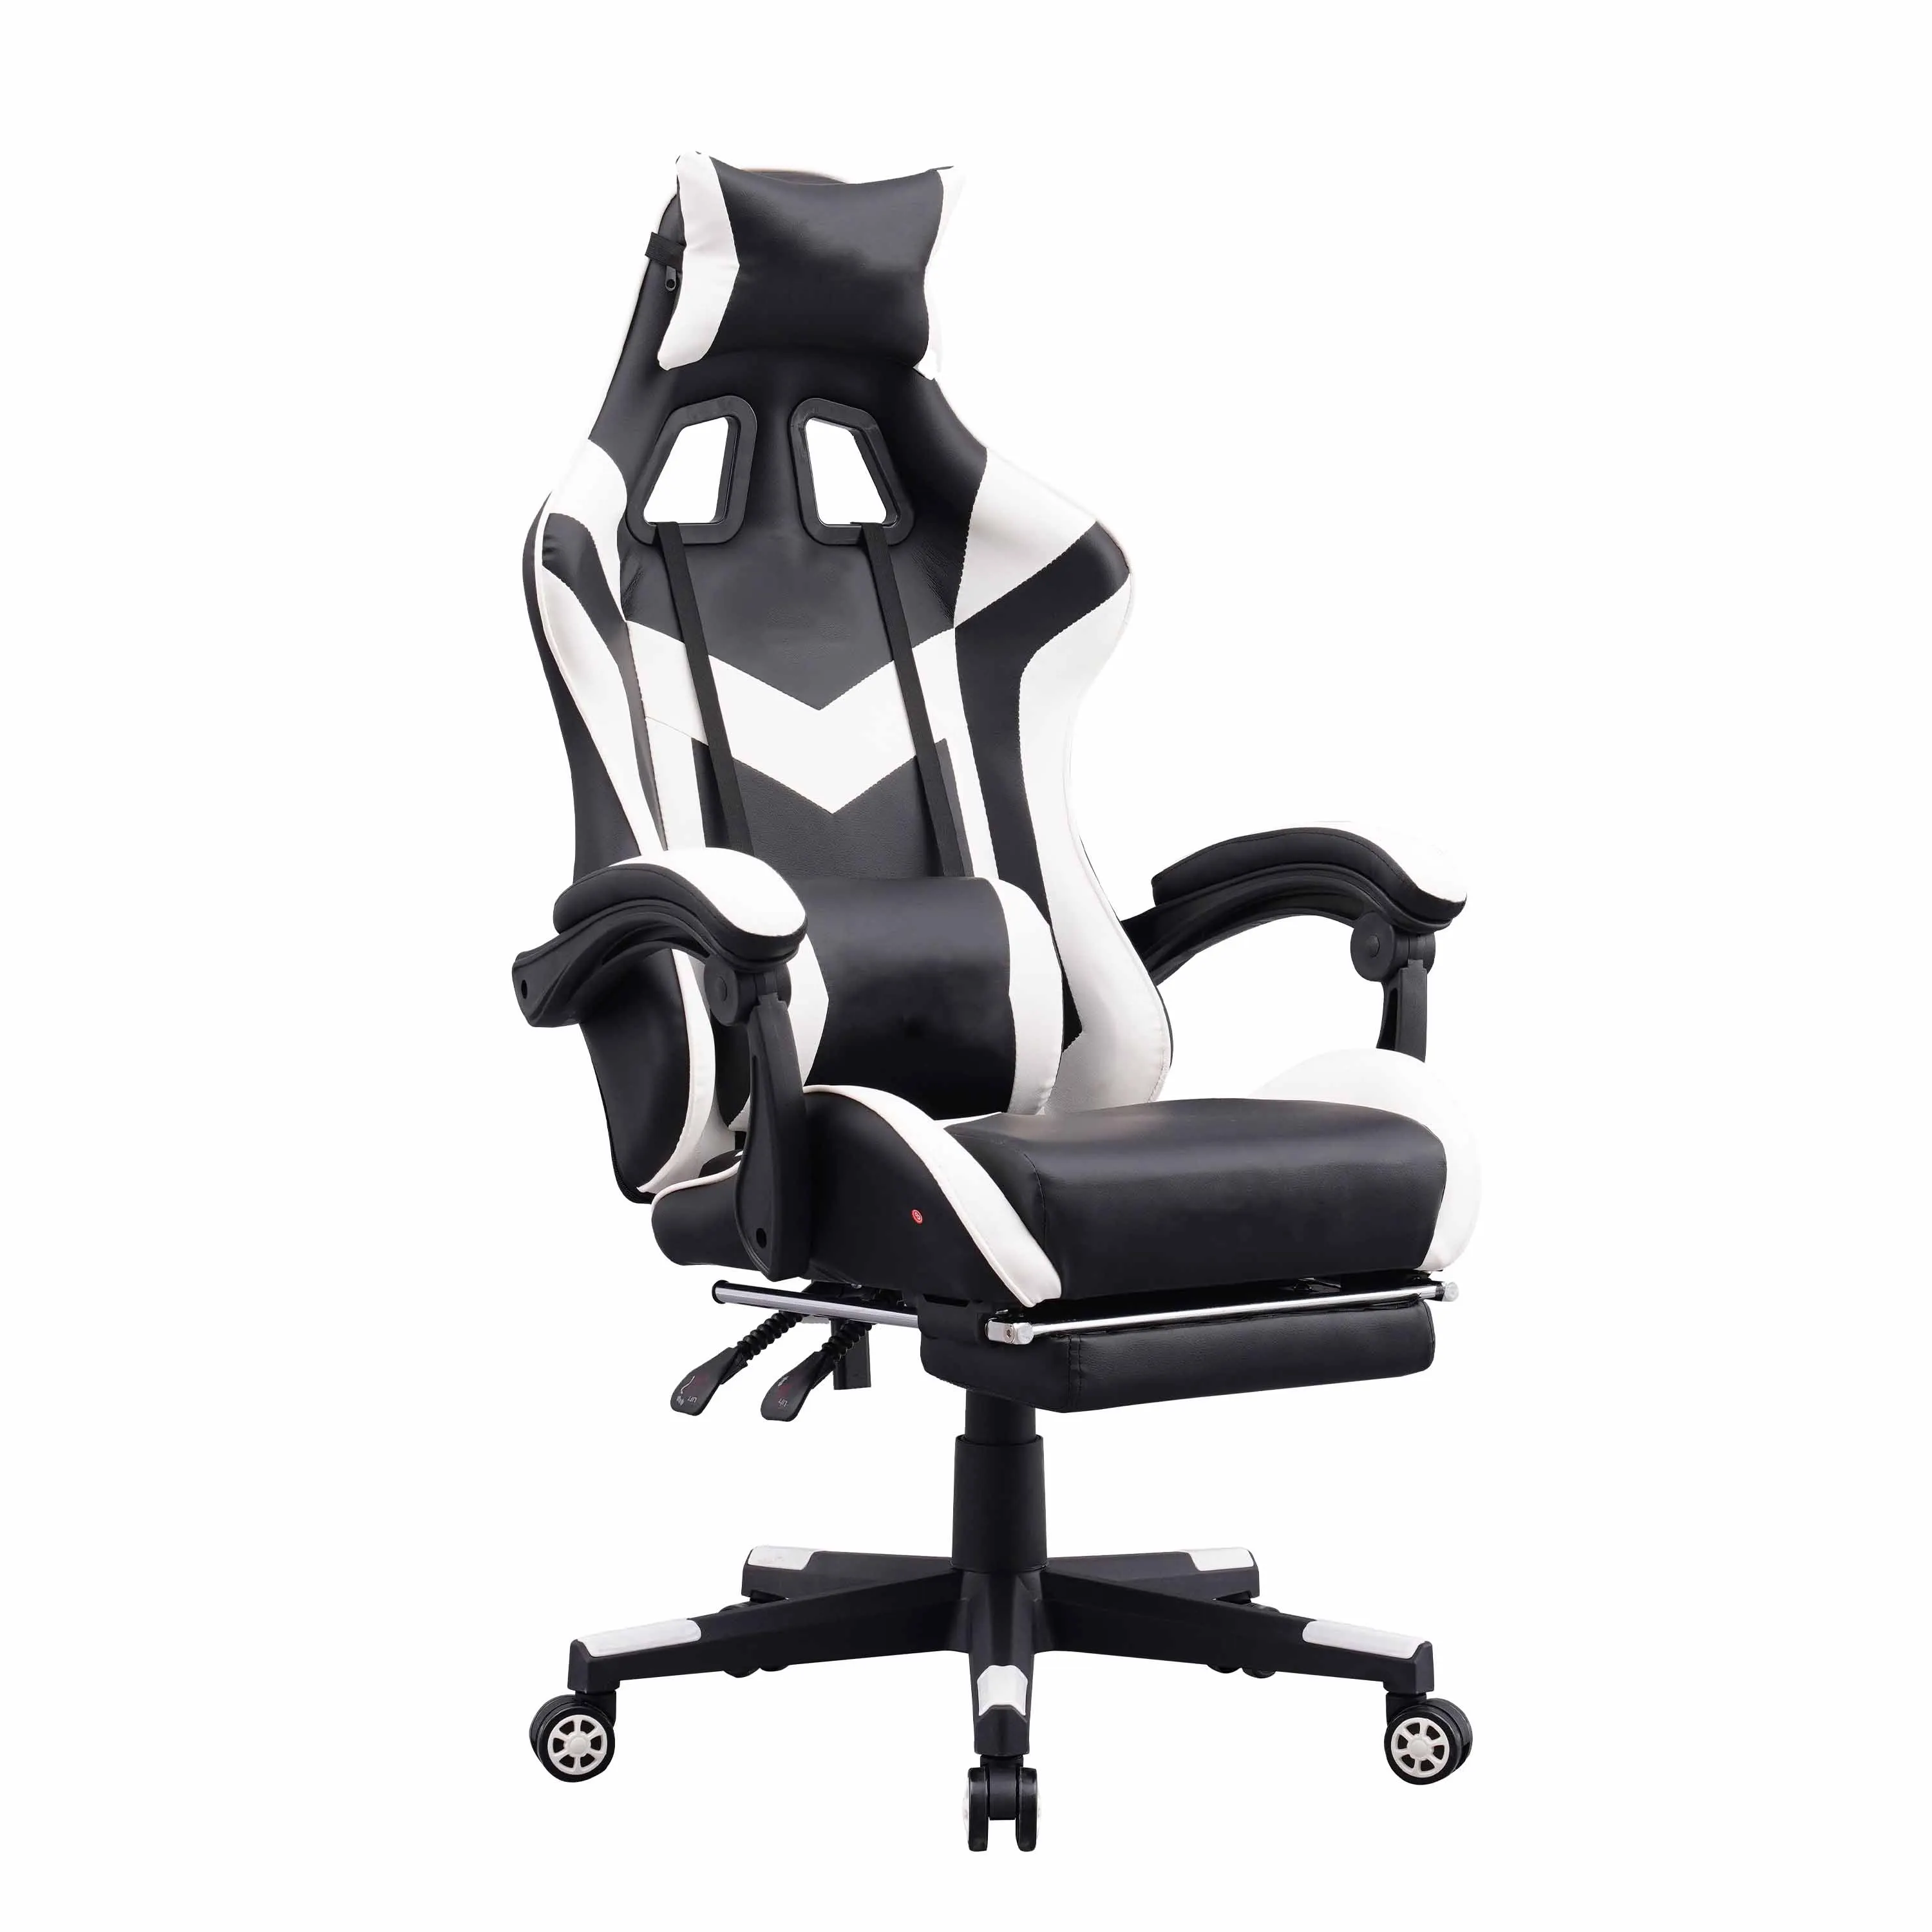 Dowinx -6689S-Grey Gaming Chair - Malta, New - The wholesale